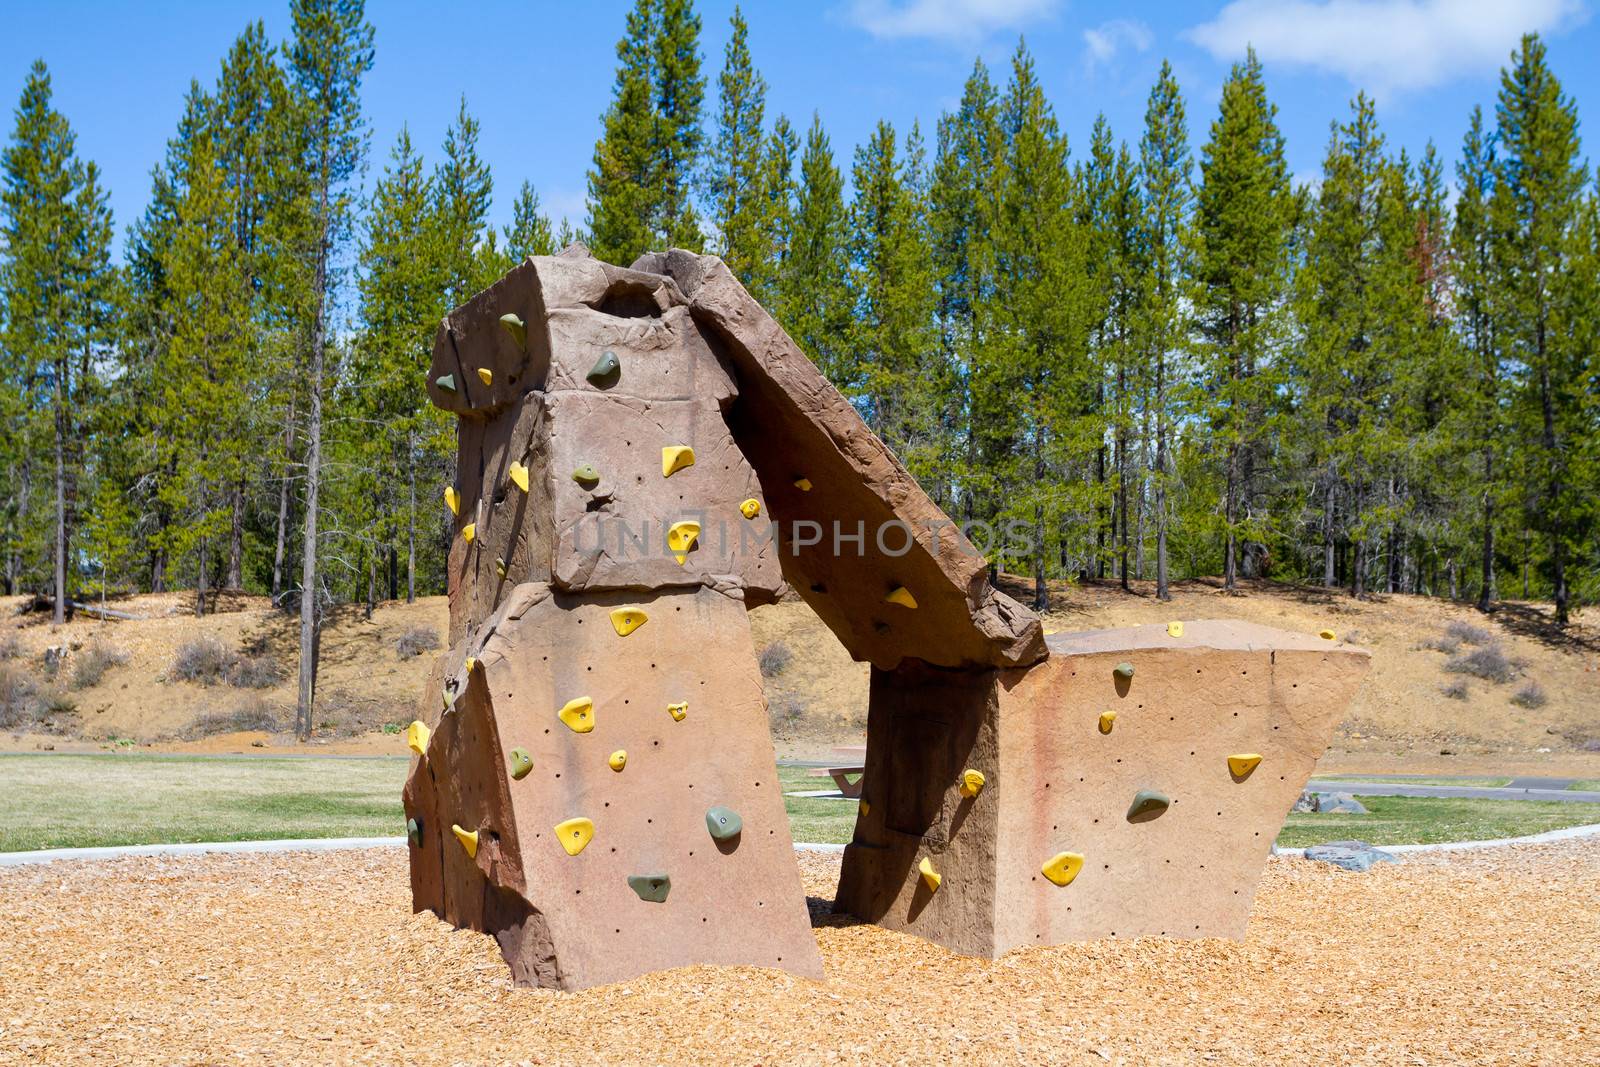 An outdoor rock climbing structure at a playground at a park for kids to practice and play on.